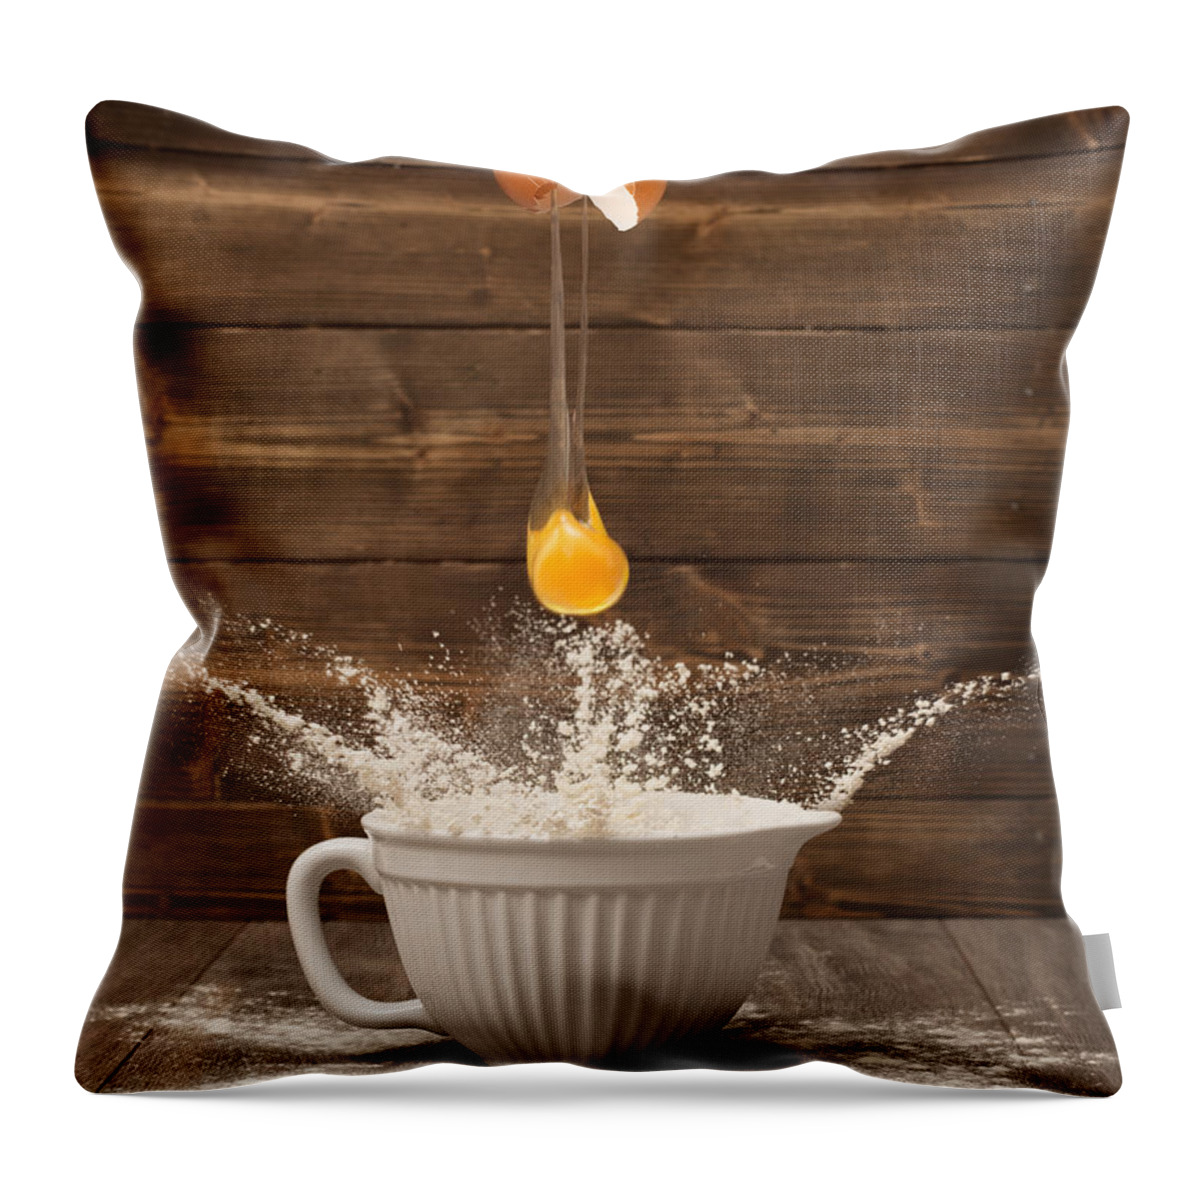 Egg Throw Pillow featuring the photograph Cracking The Egg by Amanda Elwell